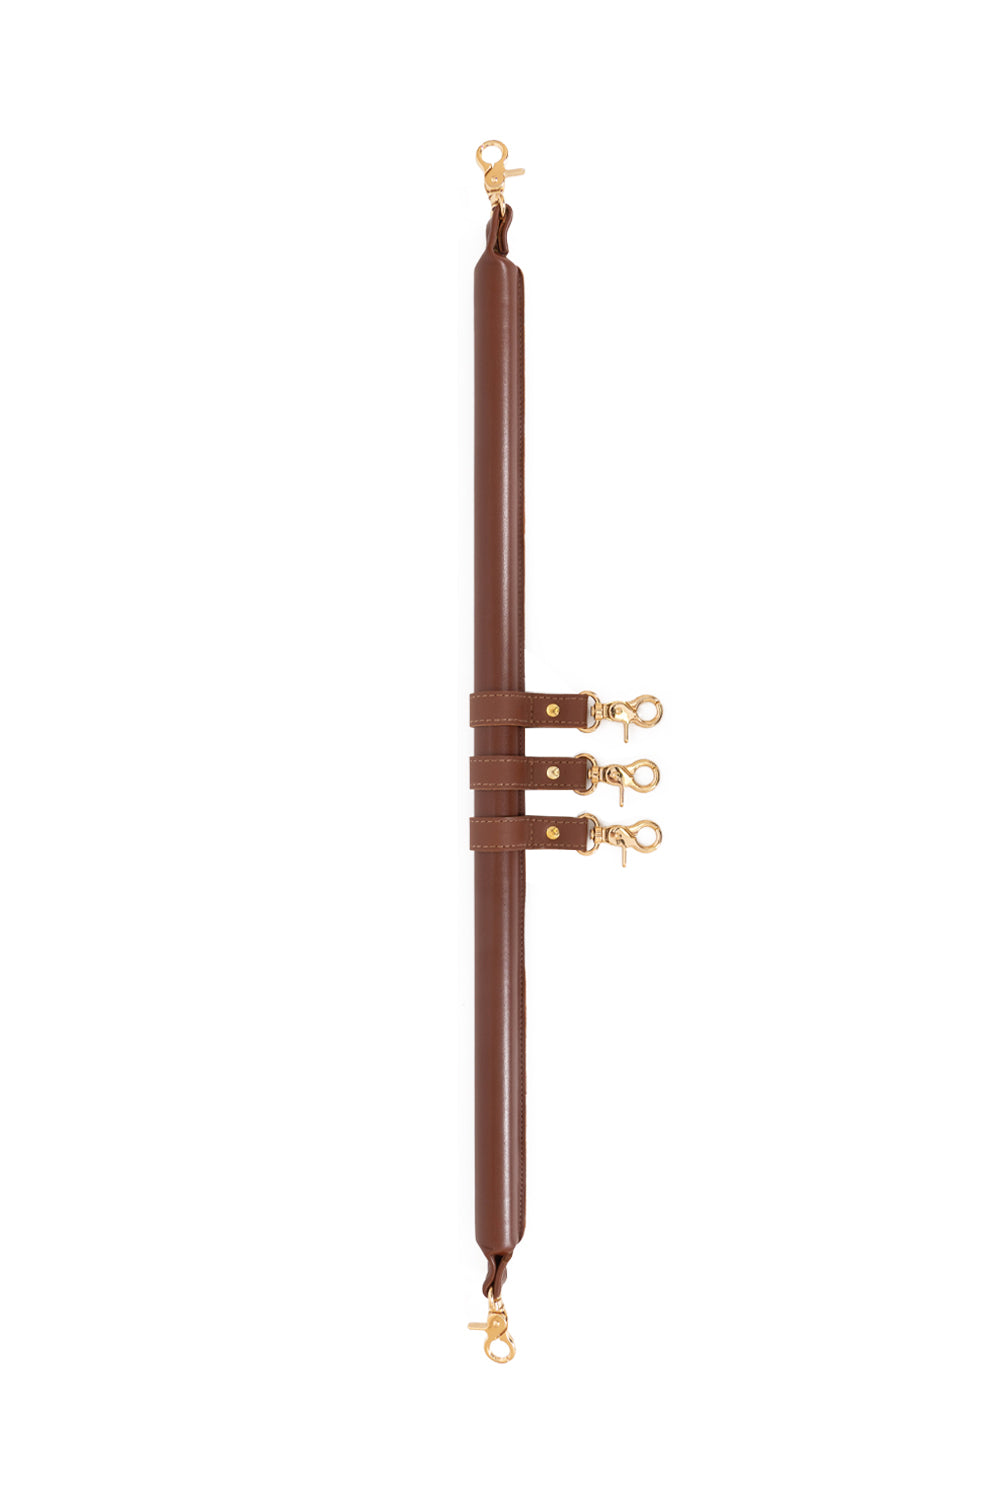 5 point BDSM Leather Spreader Bar with cuff hooks